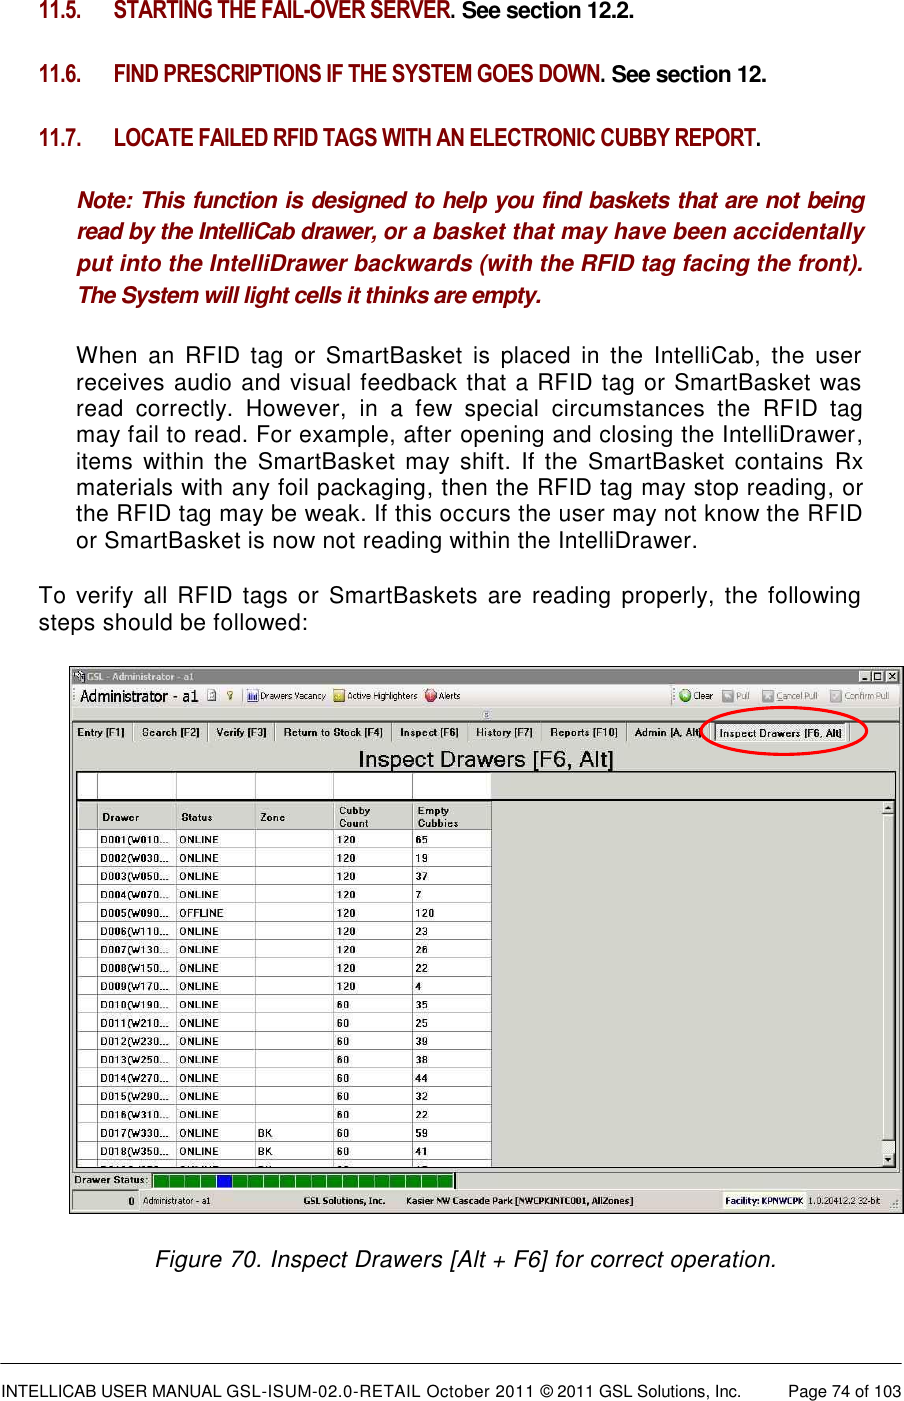  INTELLICAB USER MANUAL GSL-ISUM-02.0-RETAIL October 2011 © 2011 GSL Solutions, Inc.   Page 74 of 103   11.5.  STARTING THE FAIL-OVER SERVER. See section 12.2. 11.6.  FIND PRESCRIPTIONS IF THE SYSTEM GOES DOWN. See section 12. 11.7 .  LOCATE FAILED RFID TAGS WITH AN ELECTRONIC CUBBY REPORT. Note: This function is designed to help you find baskets that are not being read by the IntelliCab drawer, or a basket that may have been accidentally put into the IntelliDrawer backwards (with the RFID tag facing the front). The System will light cells it thinks are empty. When  an  RFID  tag  or  SmartBasket  is  placed  in  the  IntelliCab,  the  user receives audio and visual feedback that a RFID tag or SmartBasket was read  correctly.  However,  in  a  few  special  circumstances  the  RFID  tag may fail to read. For example, after opening and closing the IntelliDrawer, items  within  the  SmartBasket  may  shift. If the SmartBasket contains  Rx materials with any foil packaging, then the RFID tag may stop reading, or the RFID tag may be weak. If this occurs the user may not know the RFID or SmartBasket is now not reading within the IntelliDrawer.  To  verify all RFID tags  or SmartBaskets are  reading  properly,  the  following steps should be followed:  Figure 70. Inspect Drawers [Alt + F6] for correct operation. 